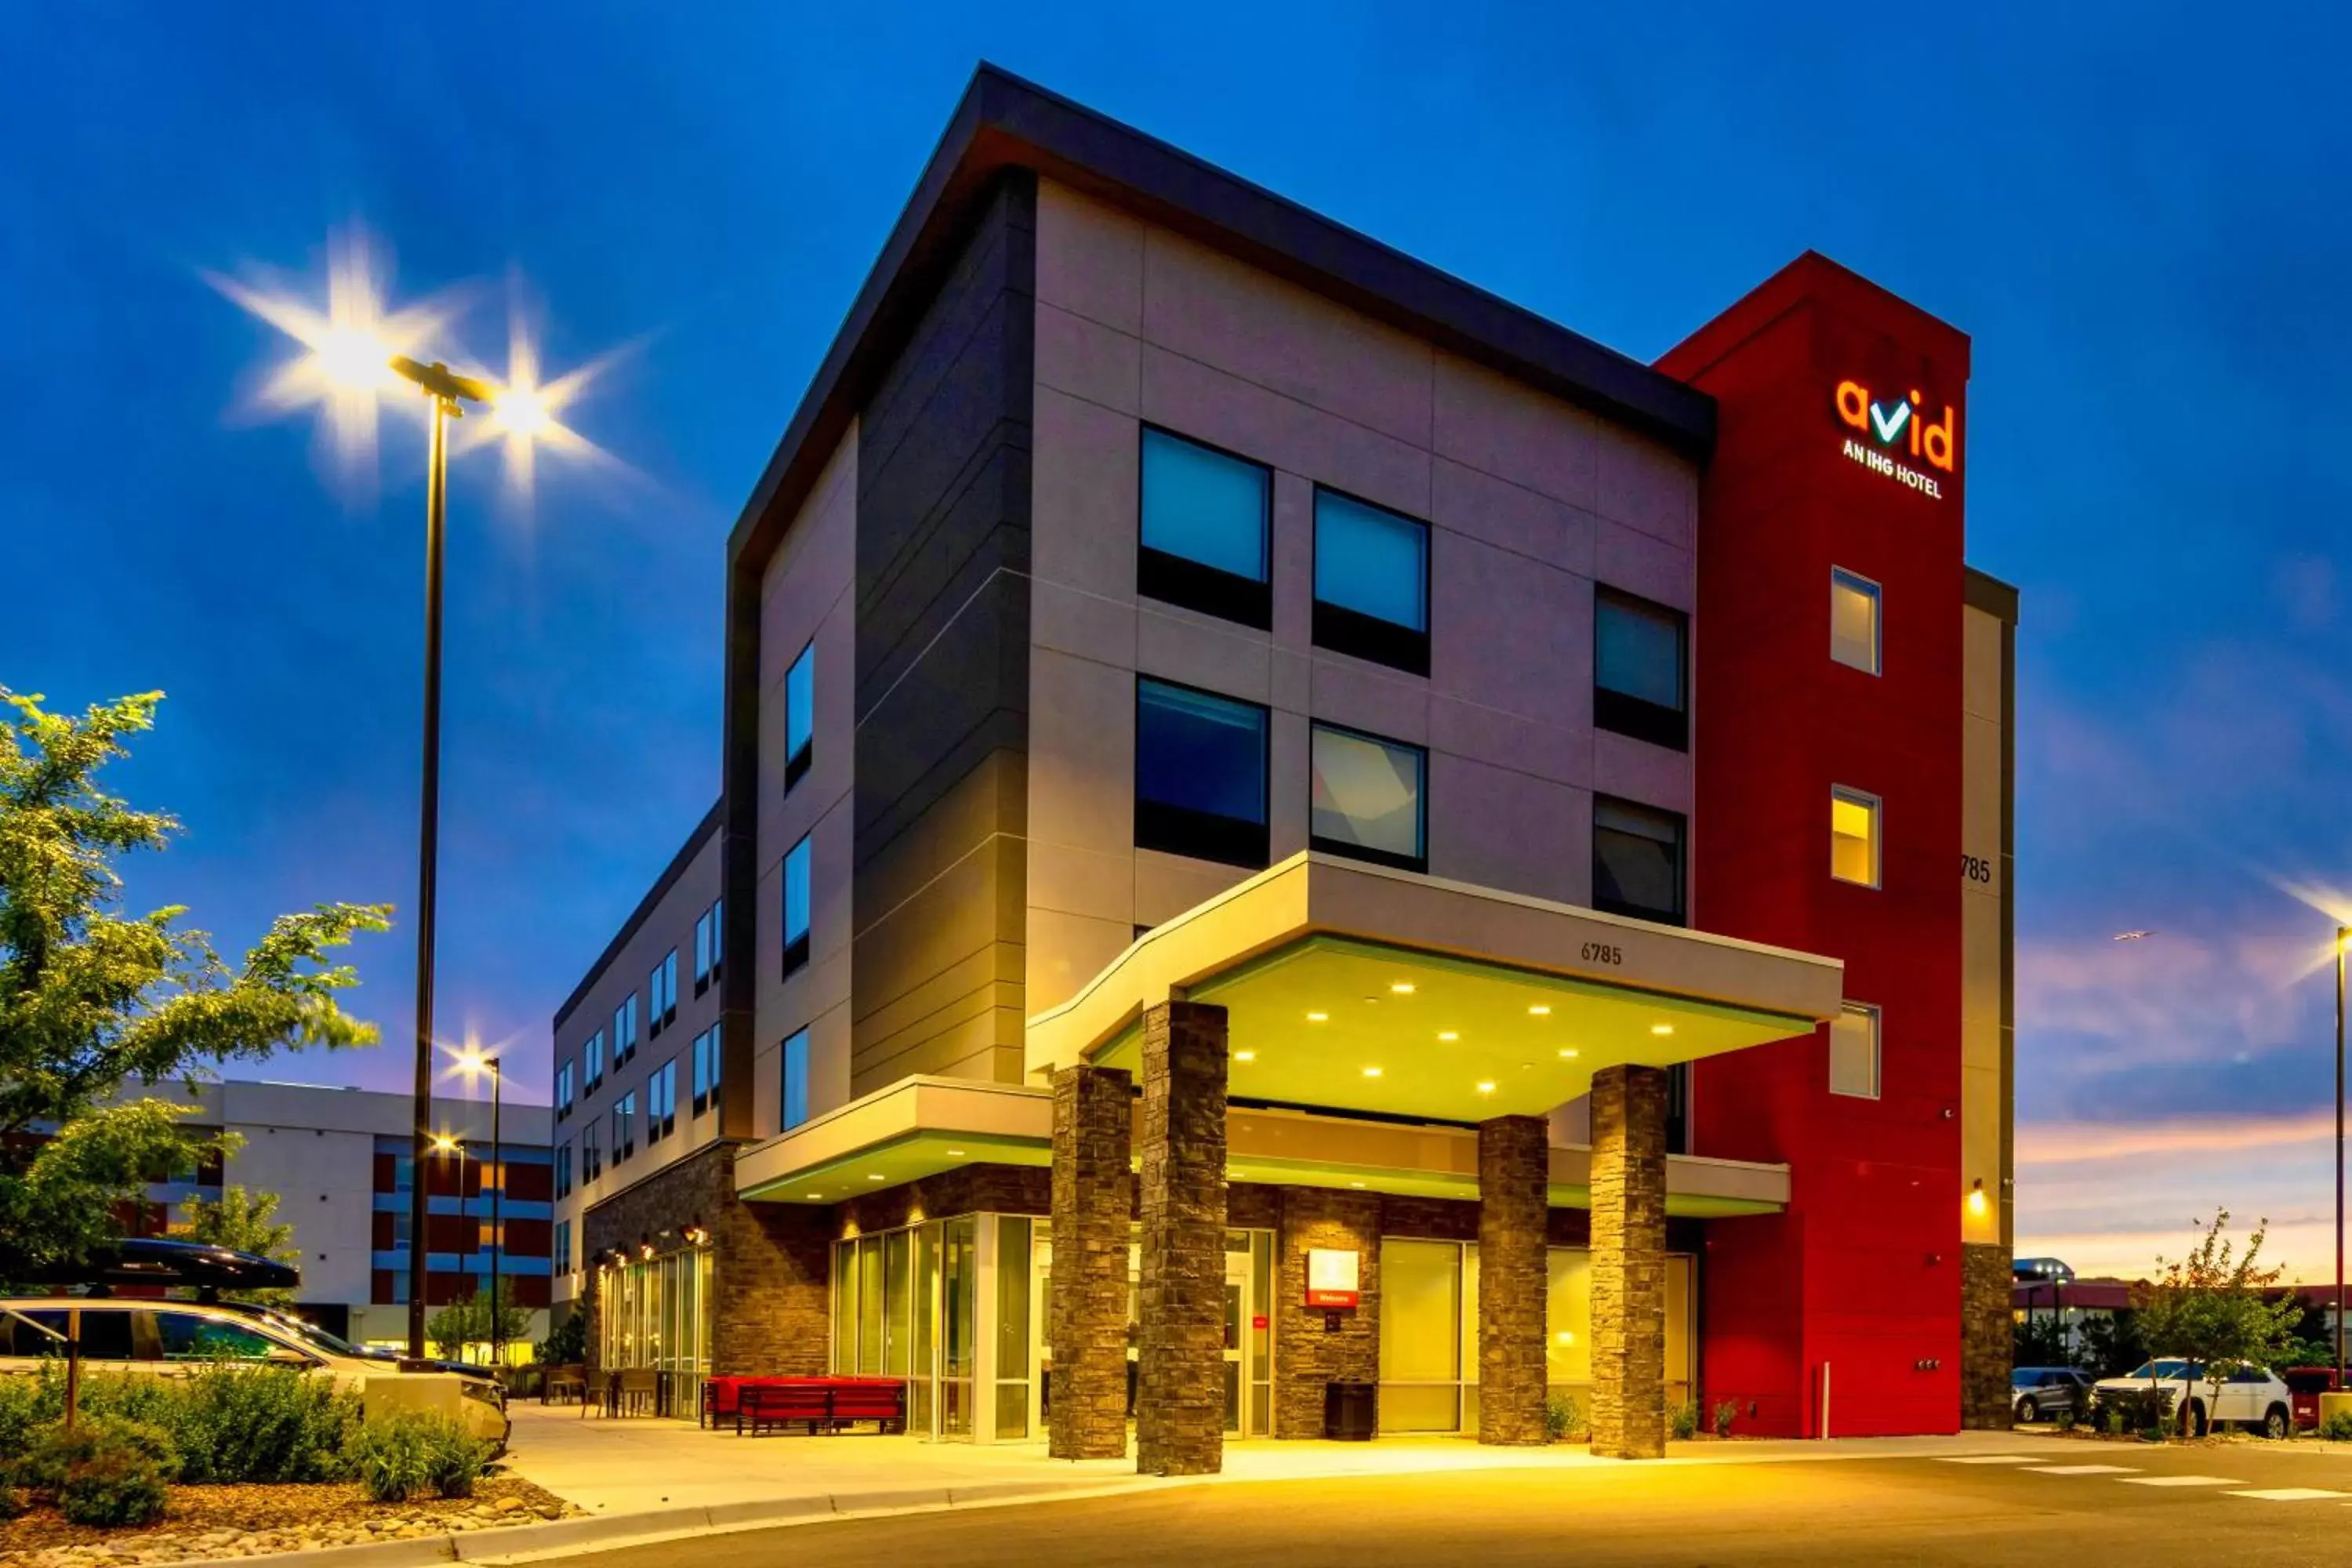 Sunset, Property Building in Avid Hotels - Denver Airport Area, an IHG Hotel